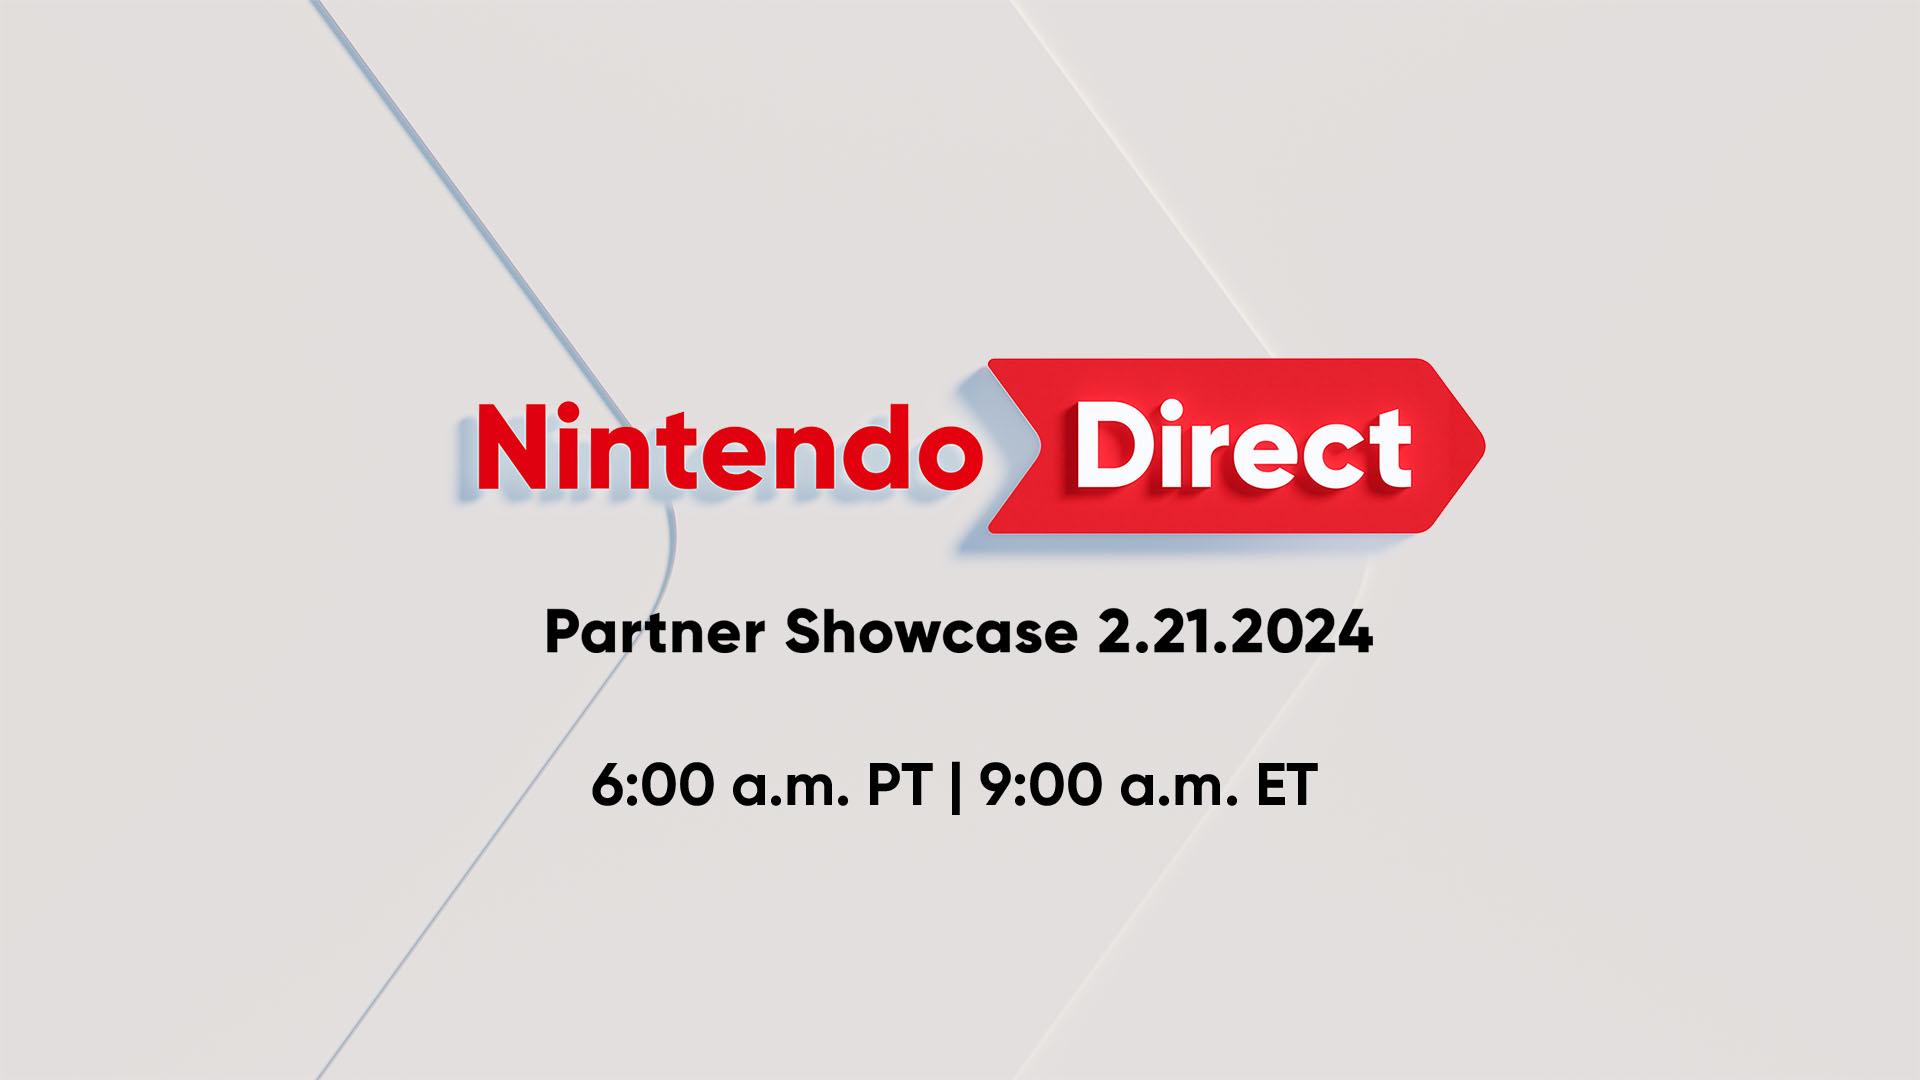 Huge week ahead for Nintendo with Direct showcase and Pokémon announcements incoming